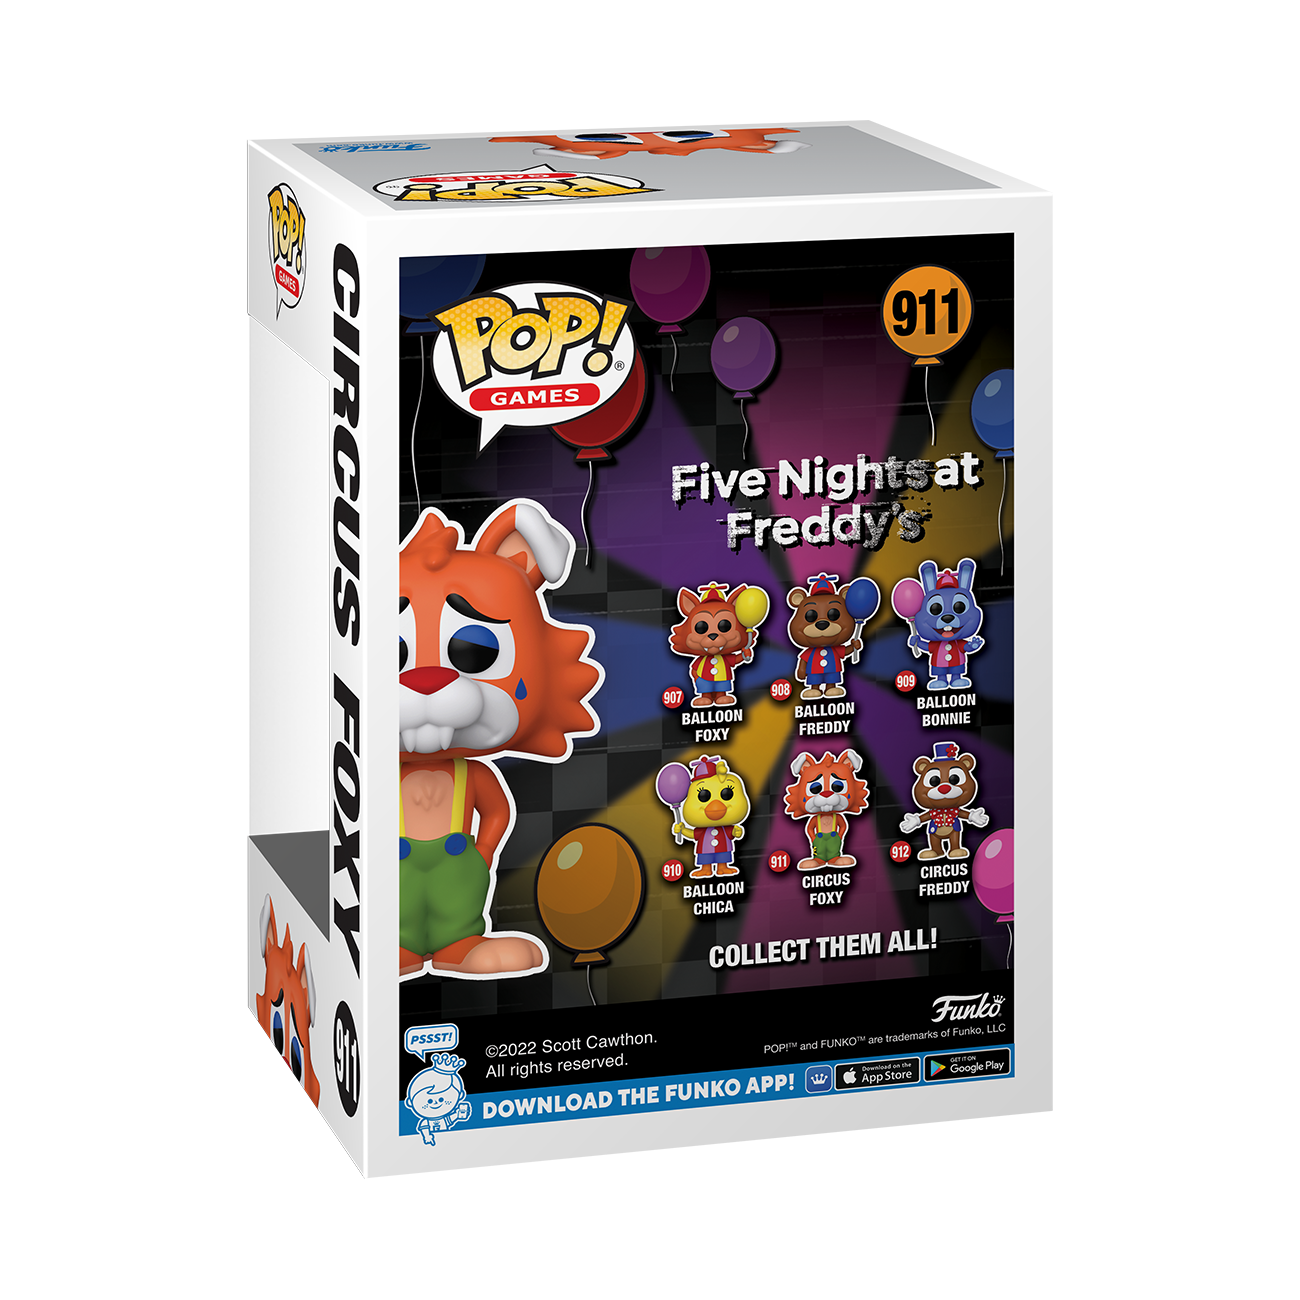 Collectible Circus Foxy #911 Funko Pop figure in the box, from Five Nights at Freddy's. Back view.